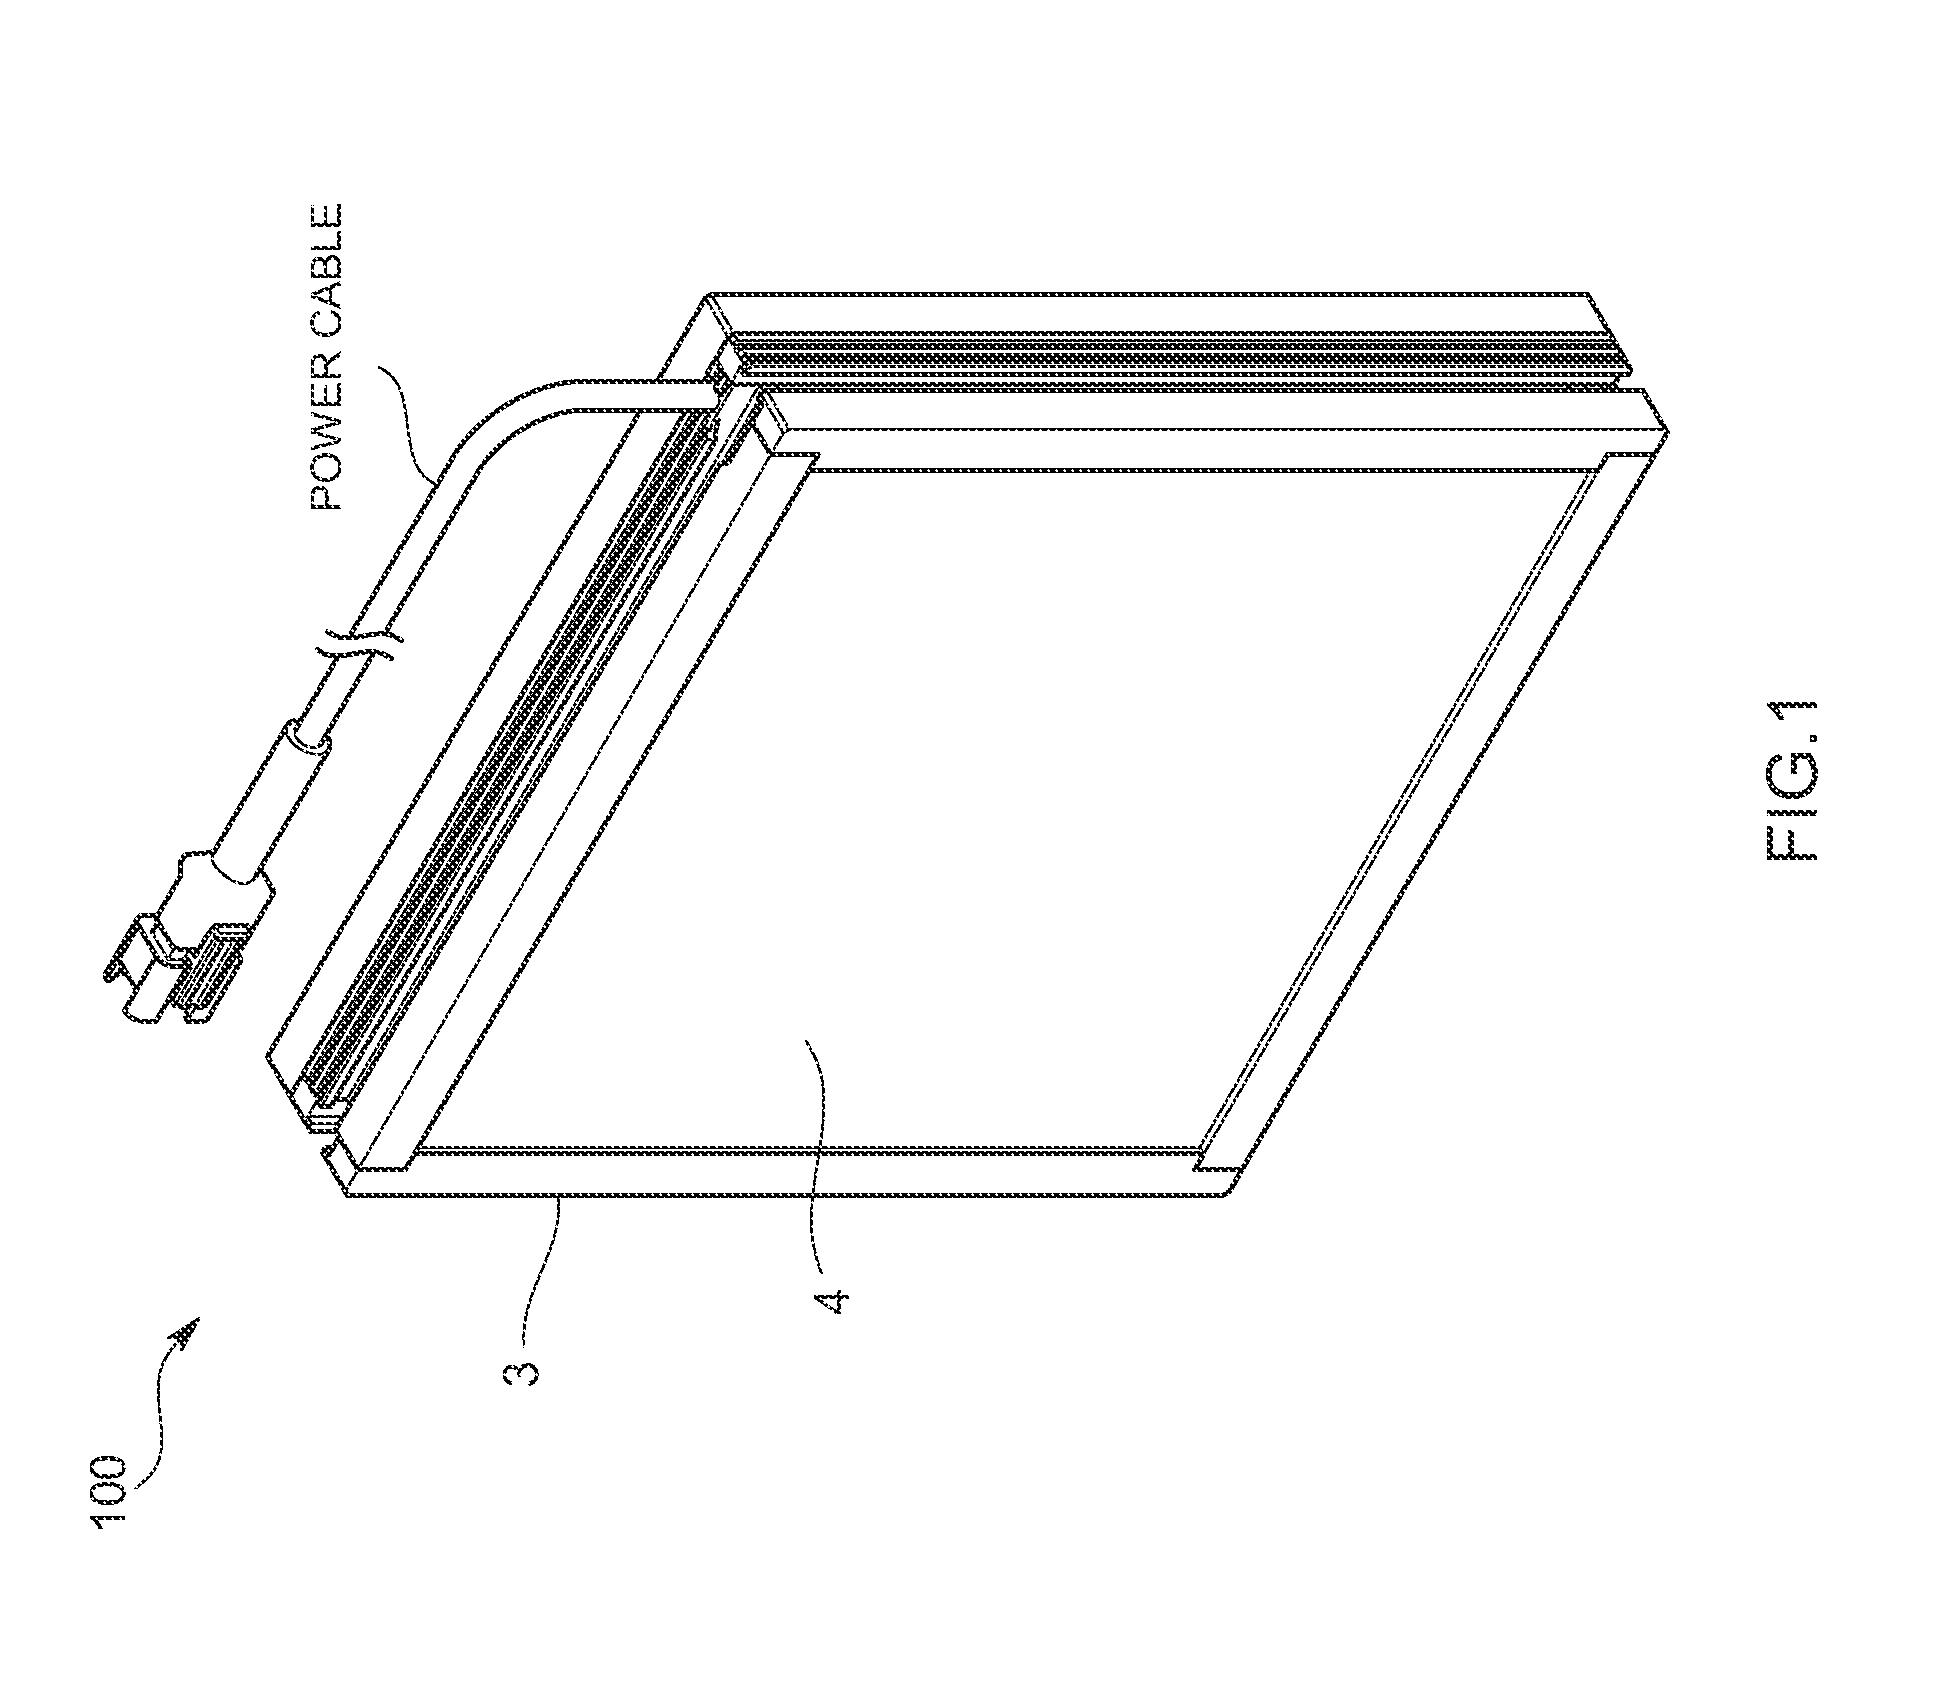 LED wiring board and light irradiation apparatus